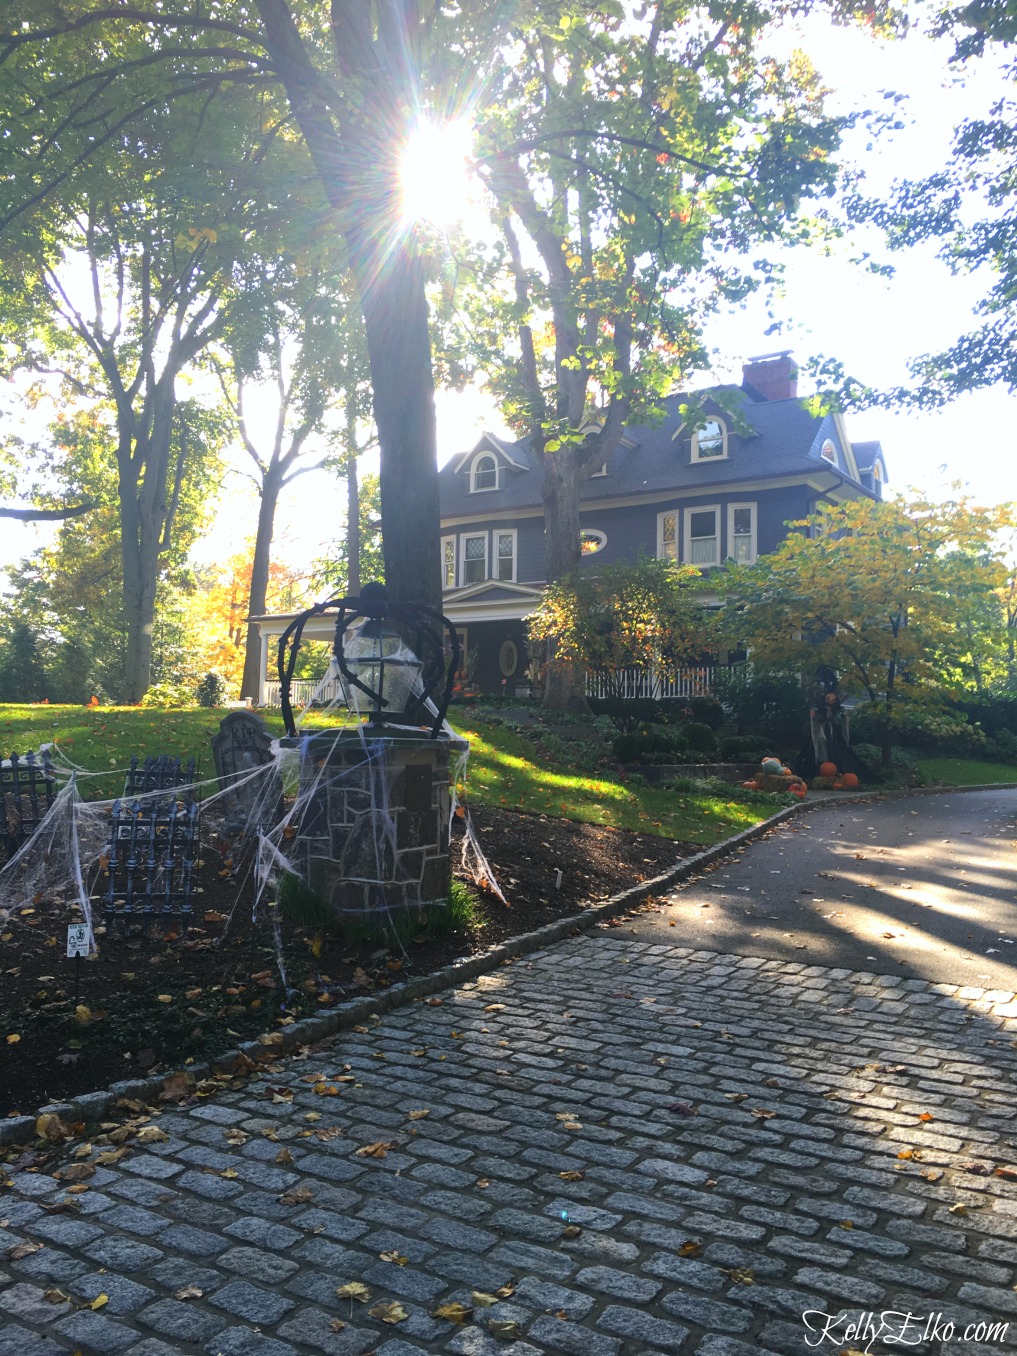 Love the spider web and huge Halloween spider - - see more fall homes with curb appeal kellyelko.com